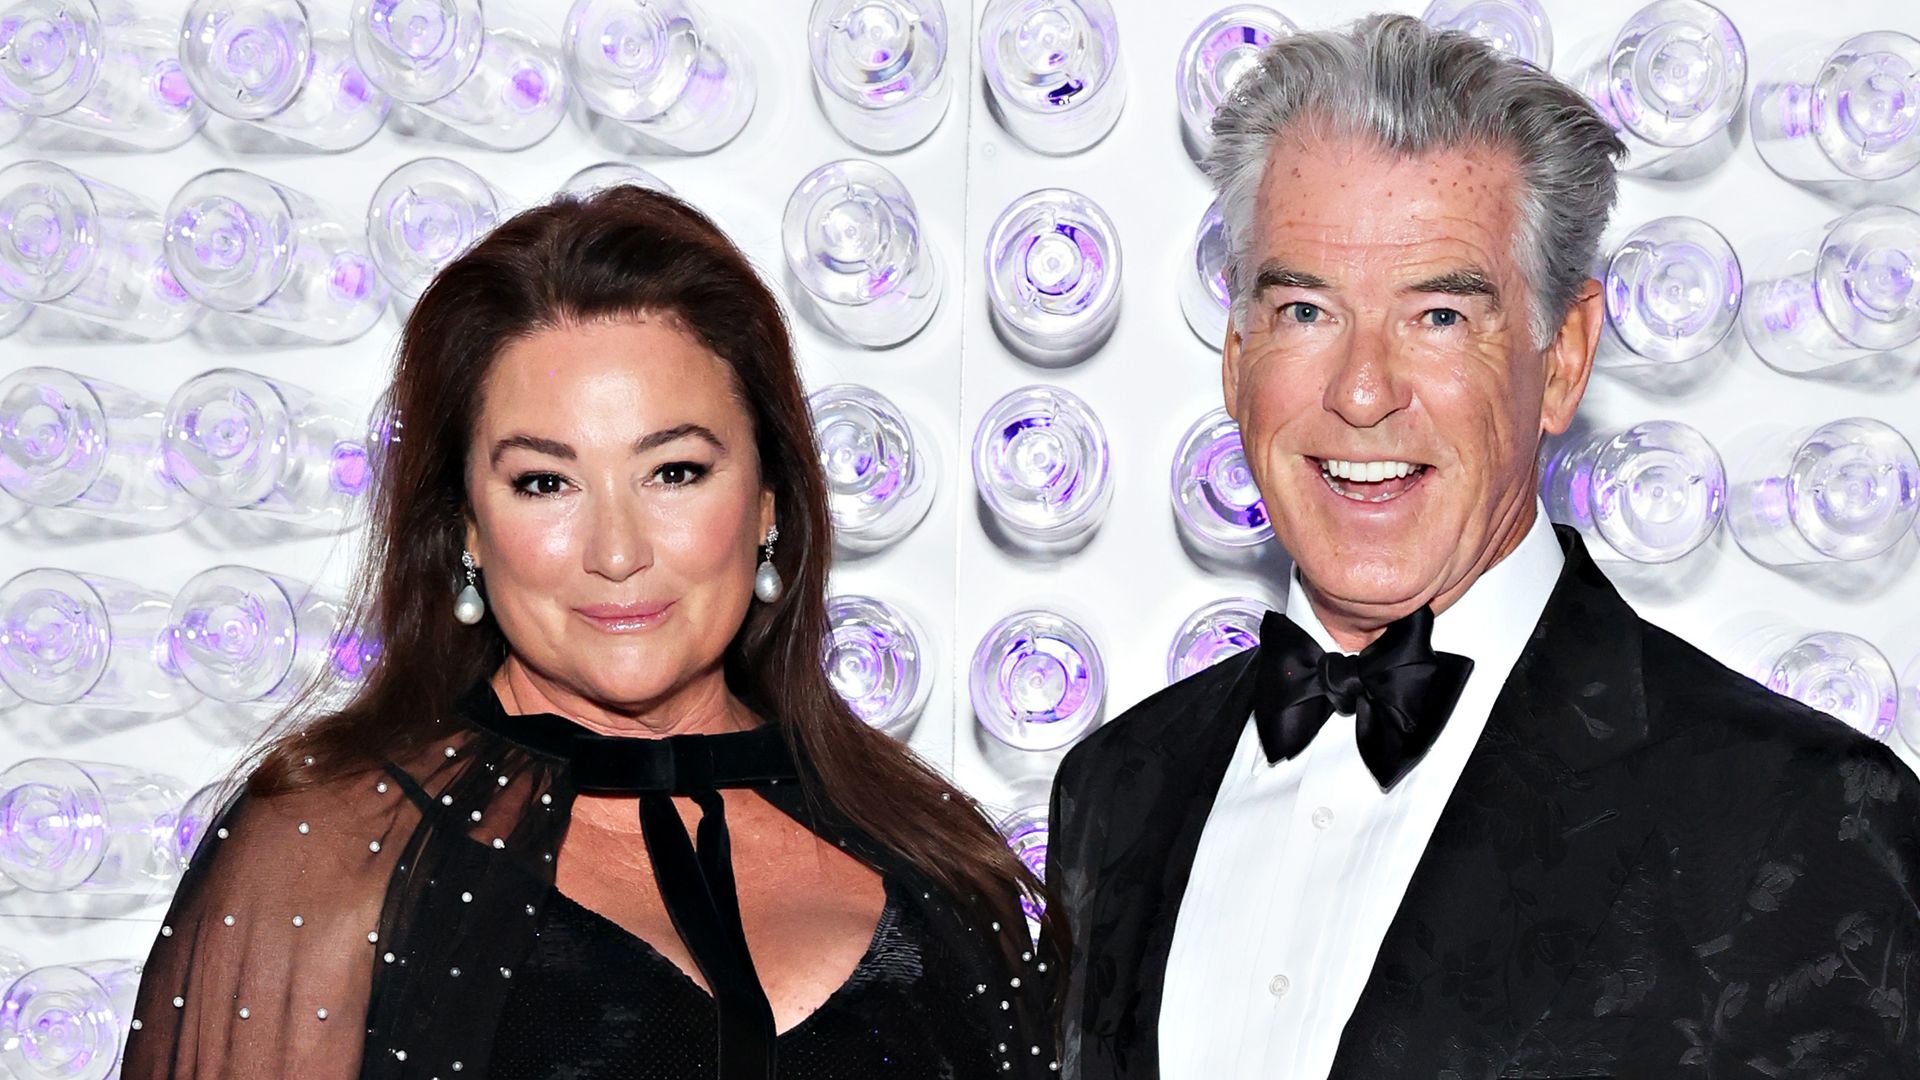 Pierce Brosnan's wife Keely Shaye stuns in a black gown as she celebrates 30th anniversary with loved-up throwbacks